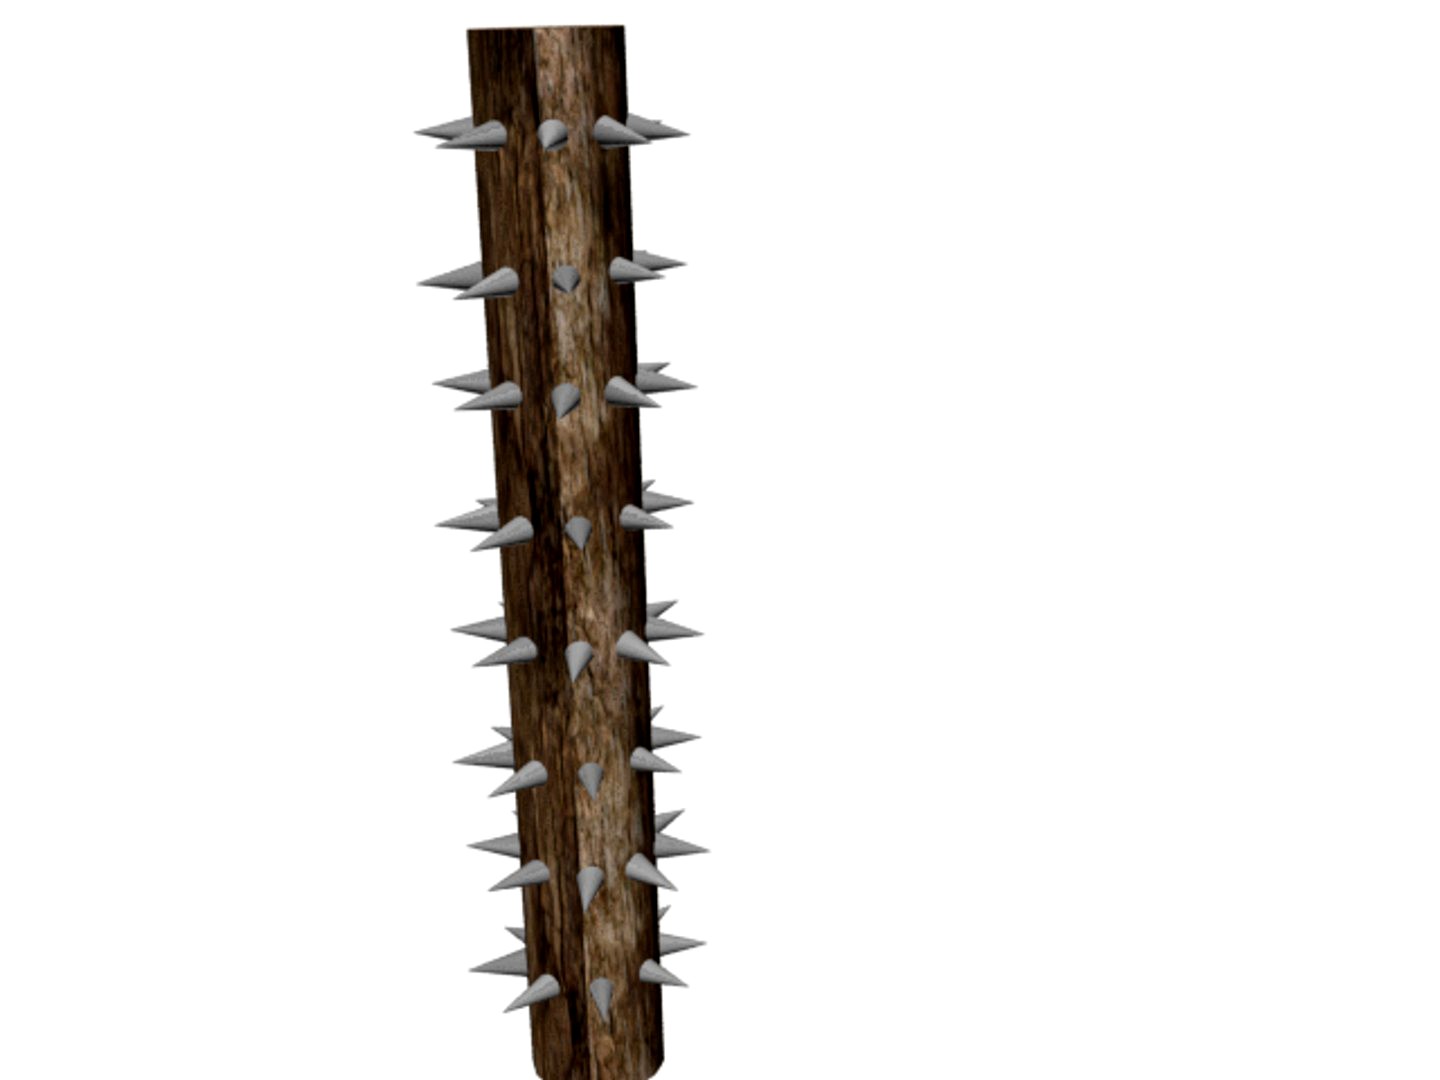 wood with spikes